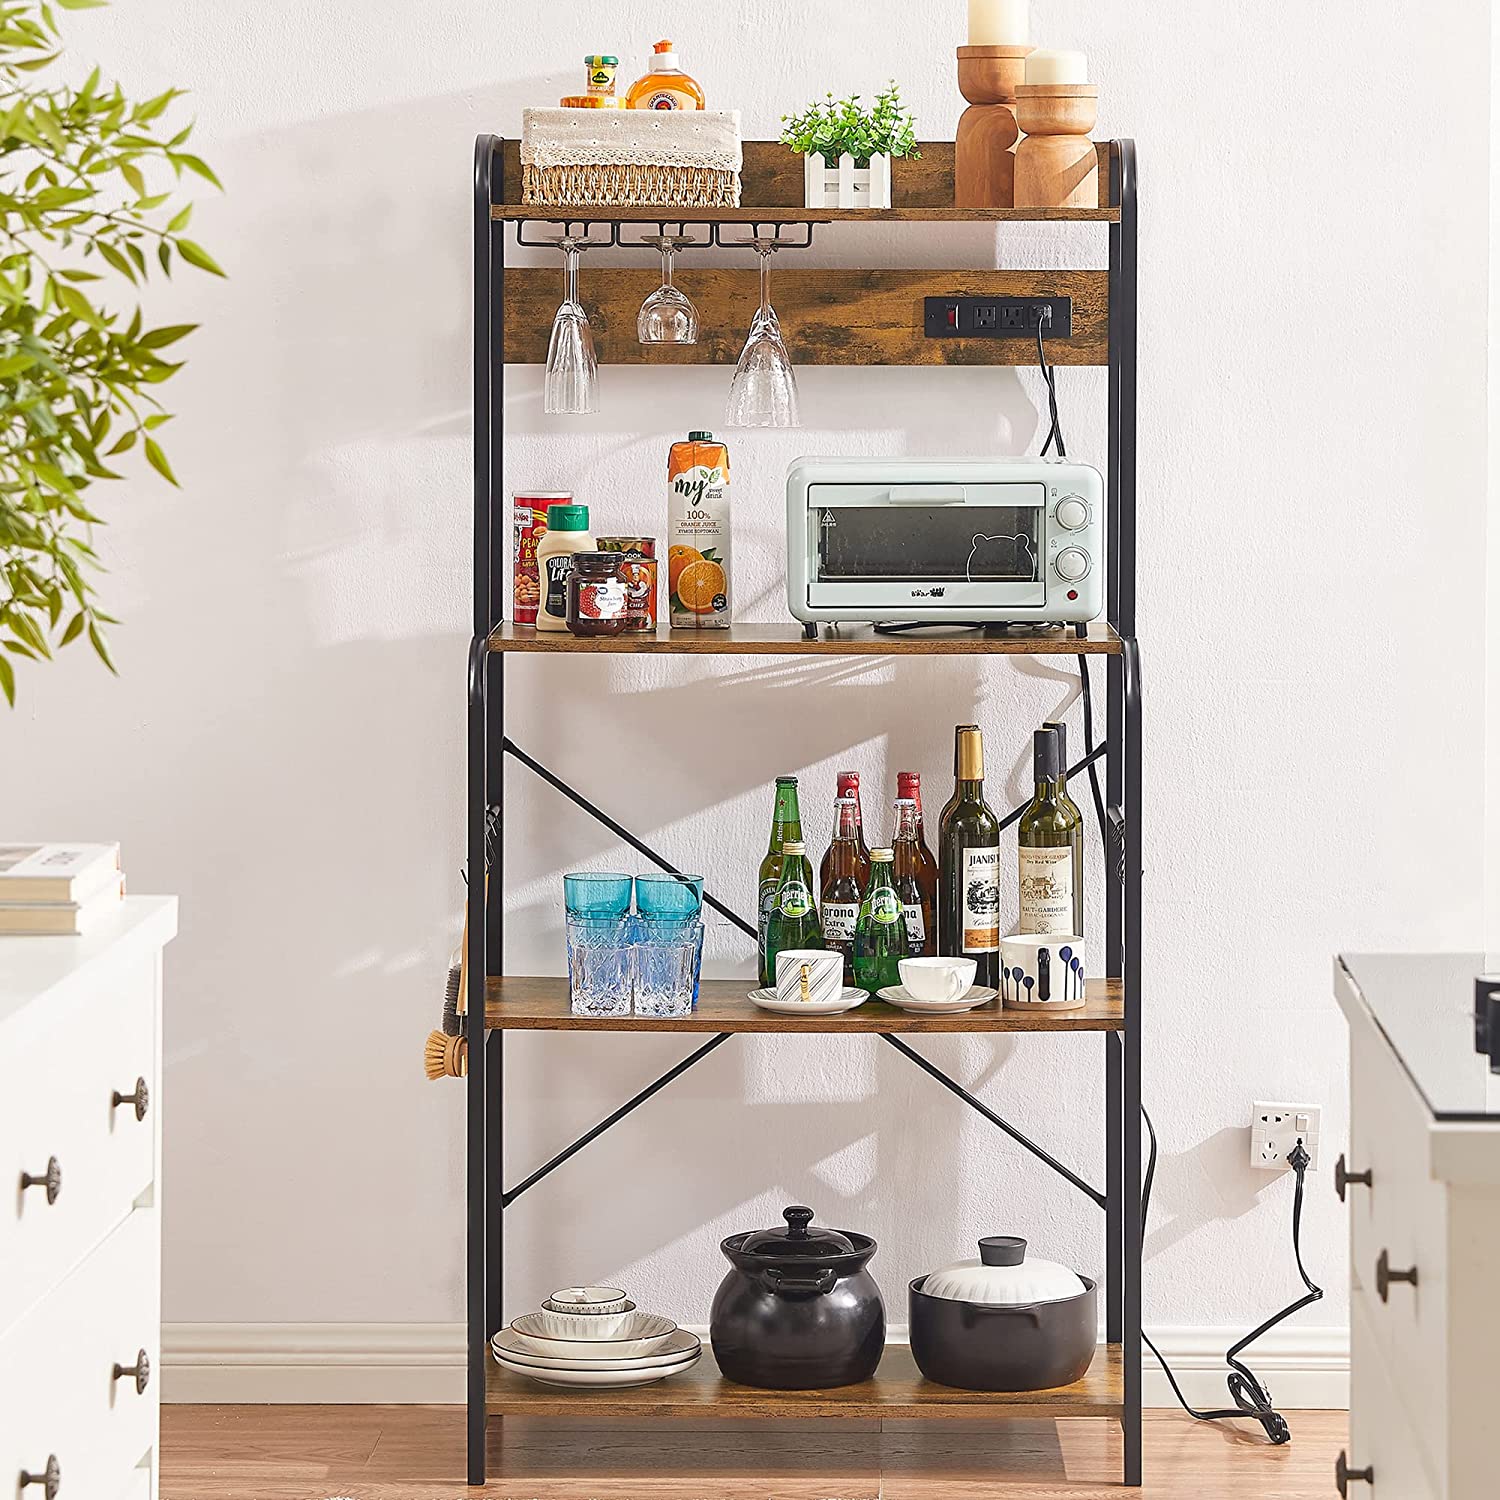 VECELO Baker's Rack with Power Outlet, Kitchen Utility Storage with 4-tier shelves, Hooks and Glass Holder for Dining Room/Kitchen Organizer